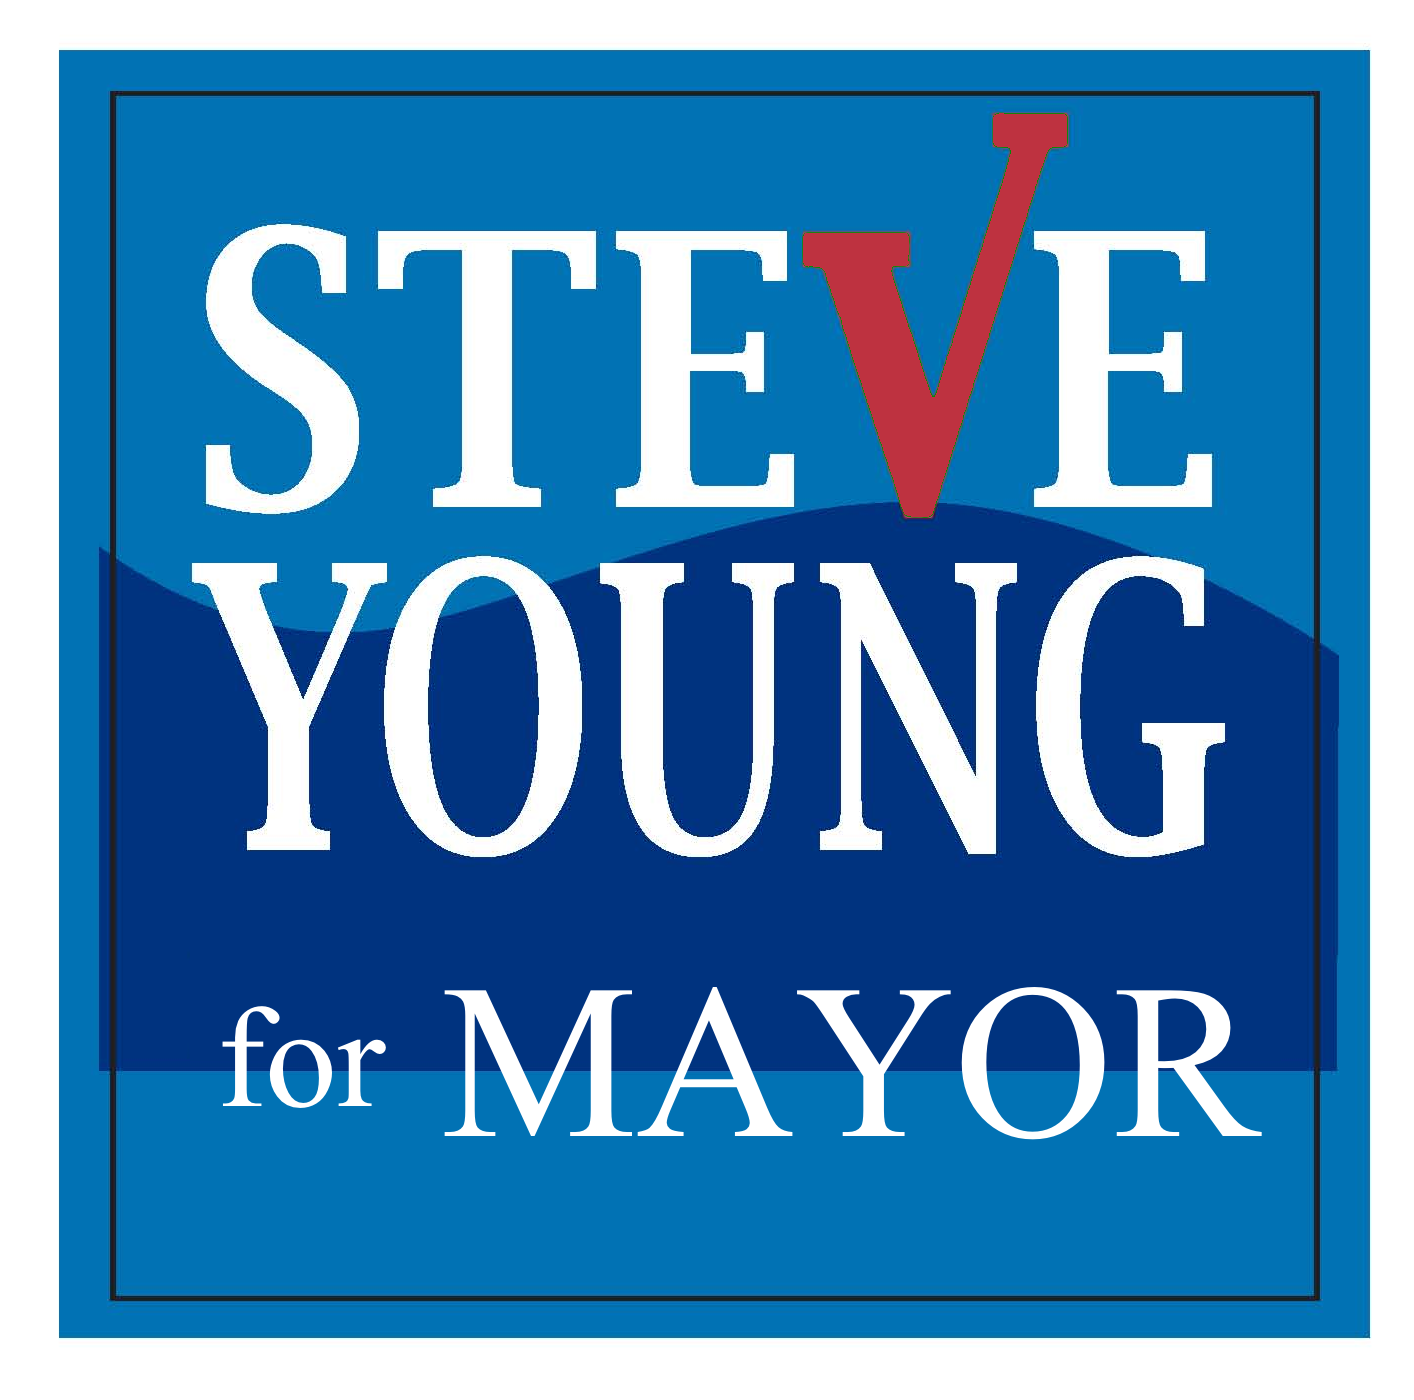 Steve Young for Mayor